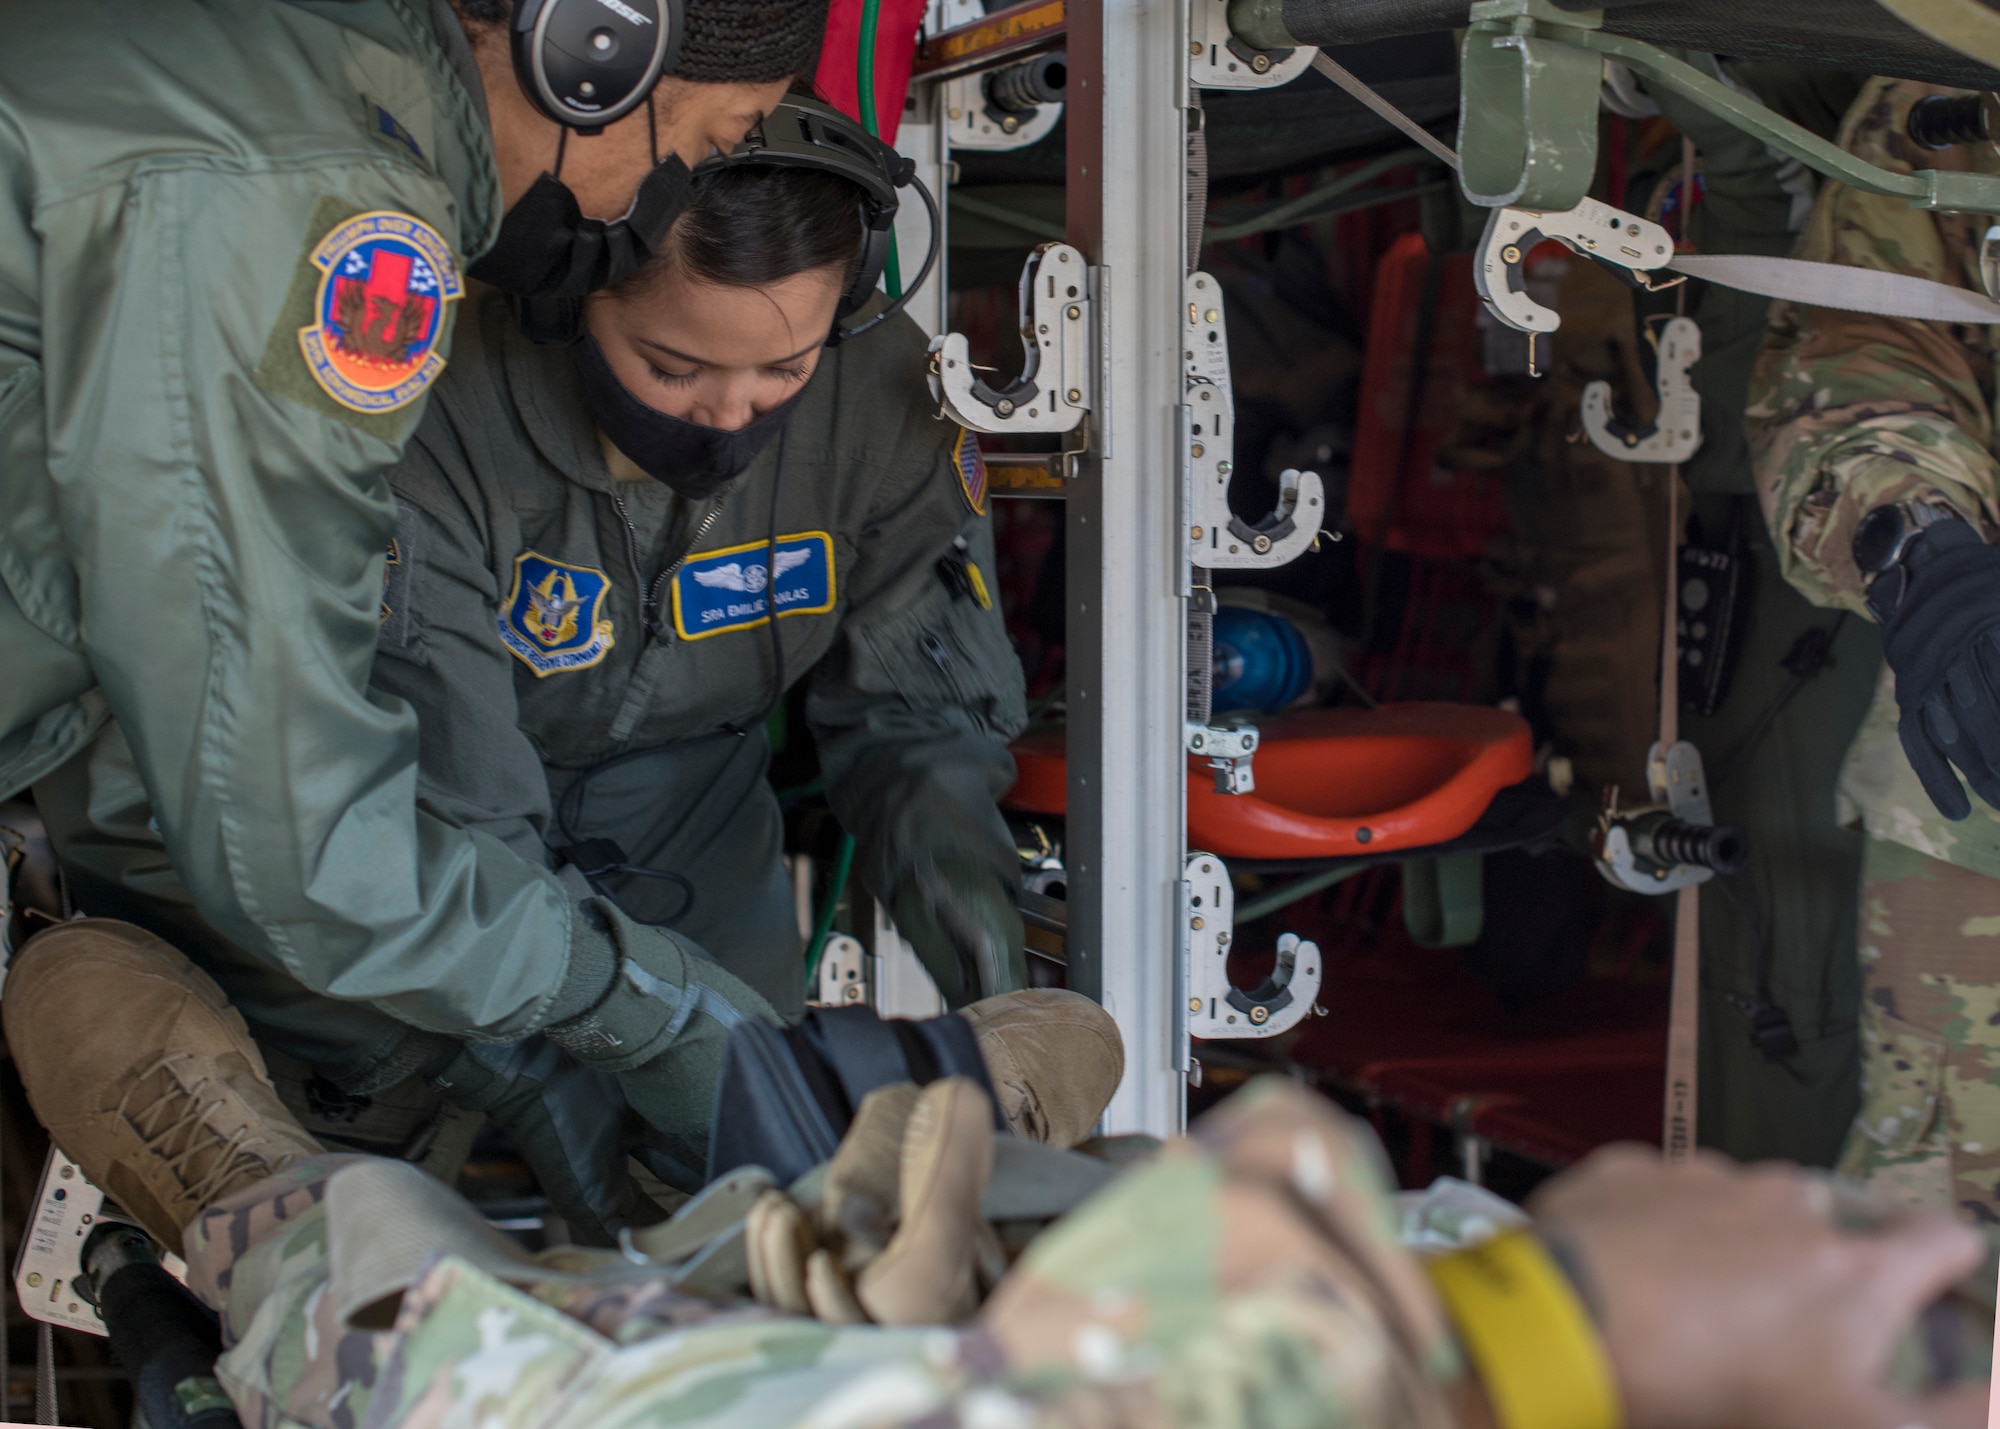 Capt. Toya Williams, 36th Aeromedical Squadron flight nurse, and Senior Airman Emilie Canlas, 36th AES flight medic, work together to secure a patient's litter during pre-deployment aeromedical evacuation training at Keesler Air Force Base, Miss., Jan. 13, 2021. The 36th AES is part of the Air Force Reserve's 403rd Wing. (U.S. Air Force photo by Senior Airman Kristen Pittman)